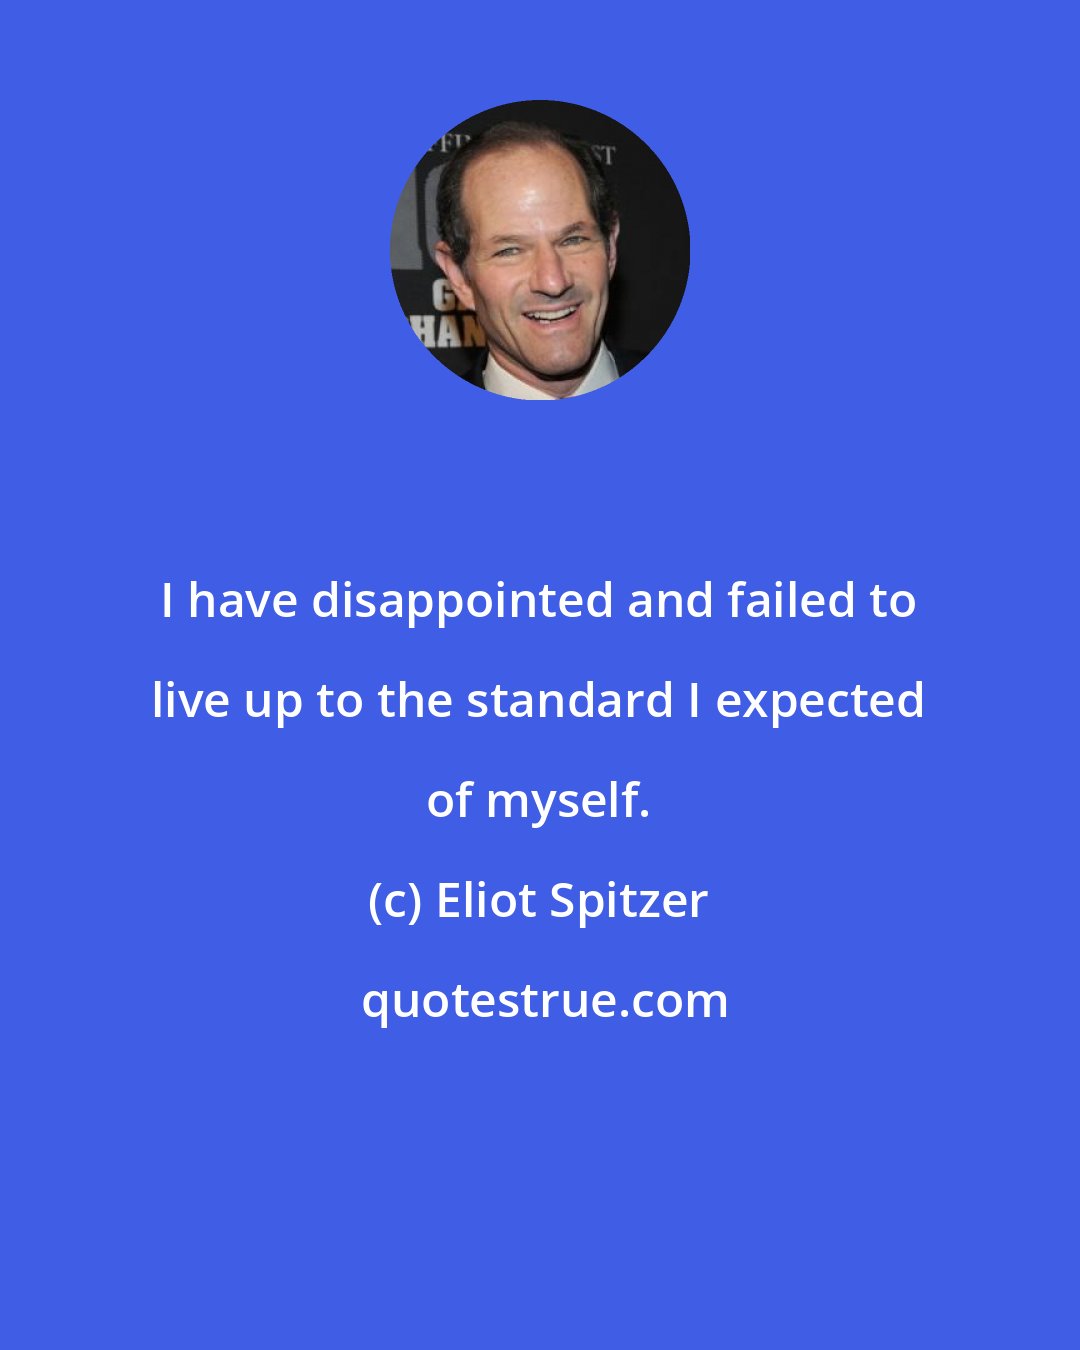 Eliot Spitzer: I have disappointed and failed to live up to the standard I expected of myself.